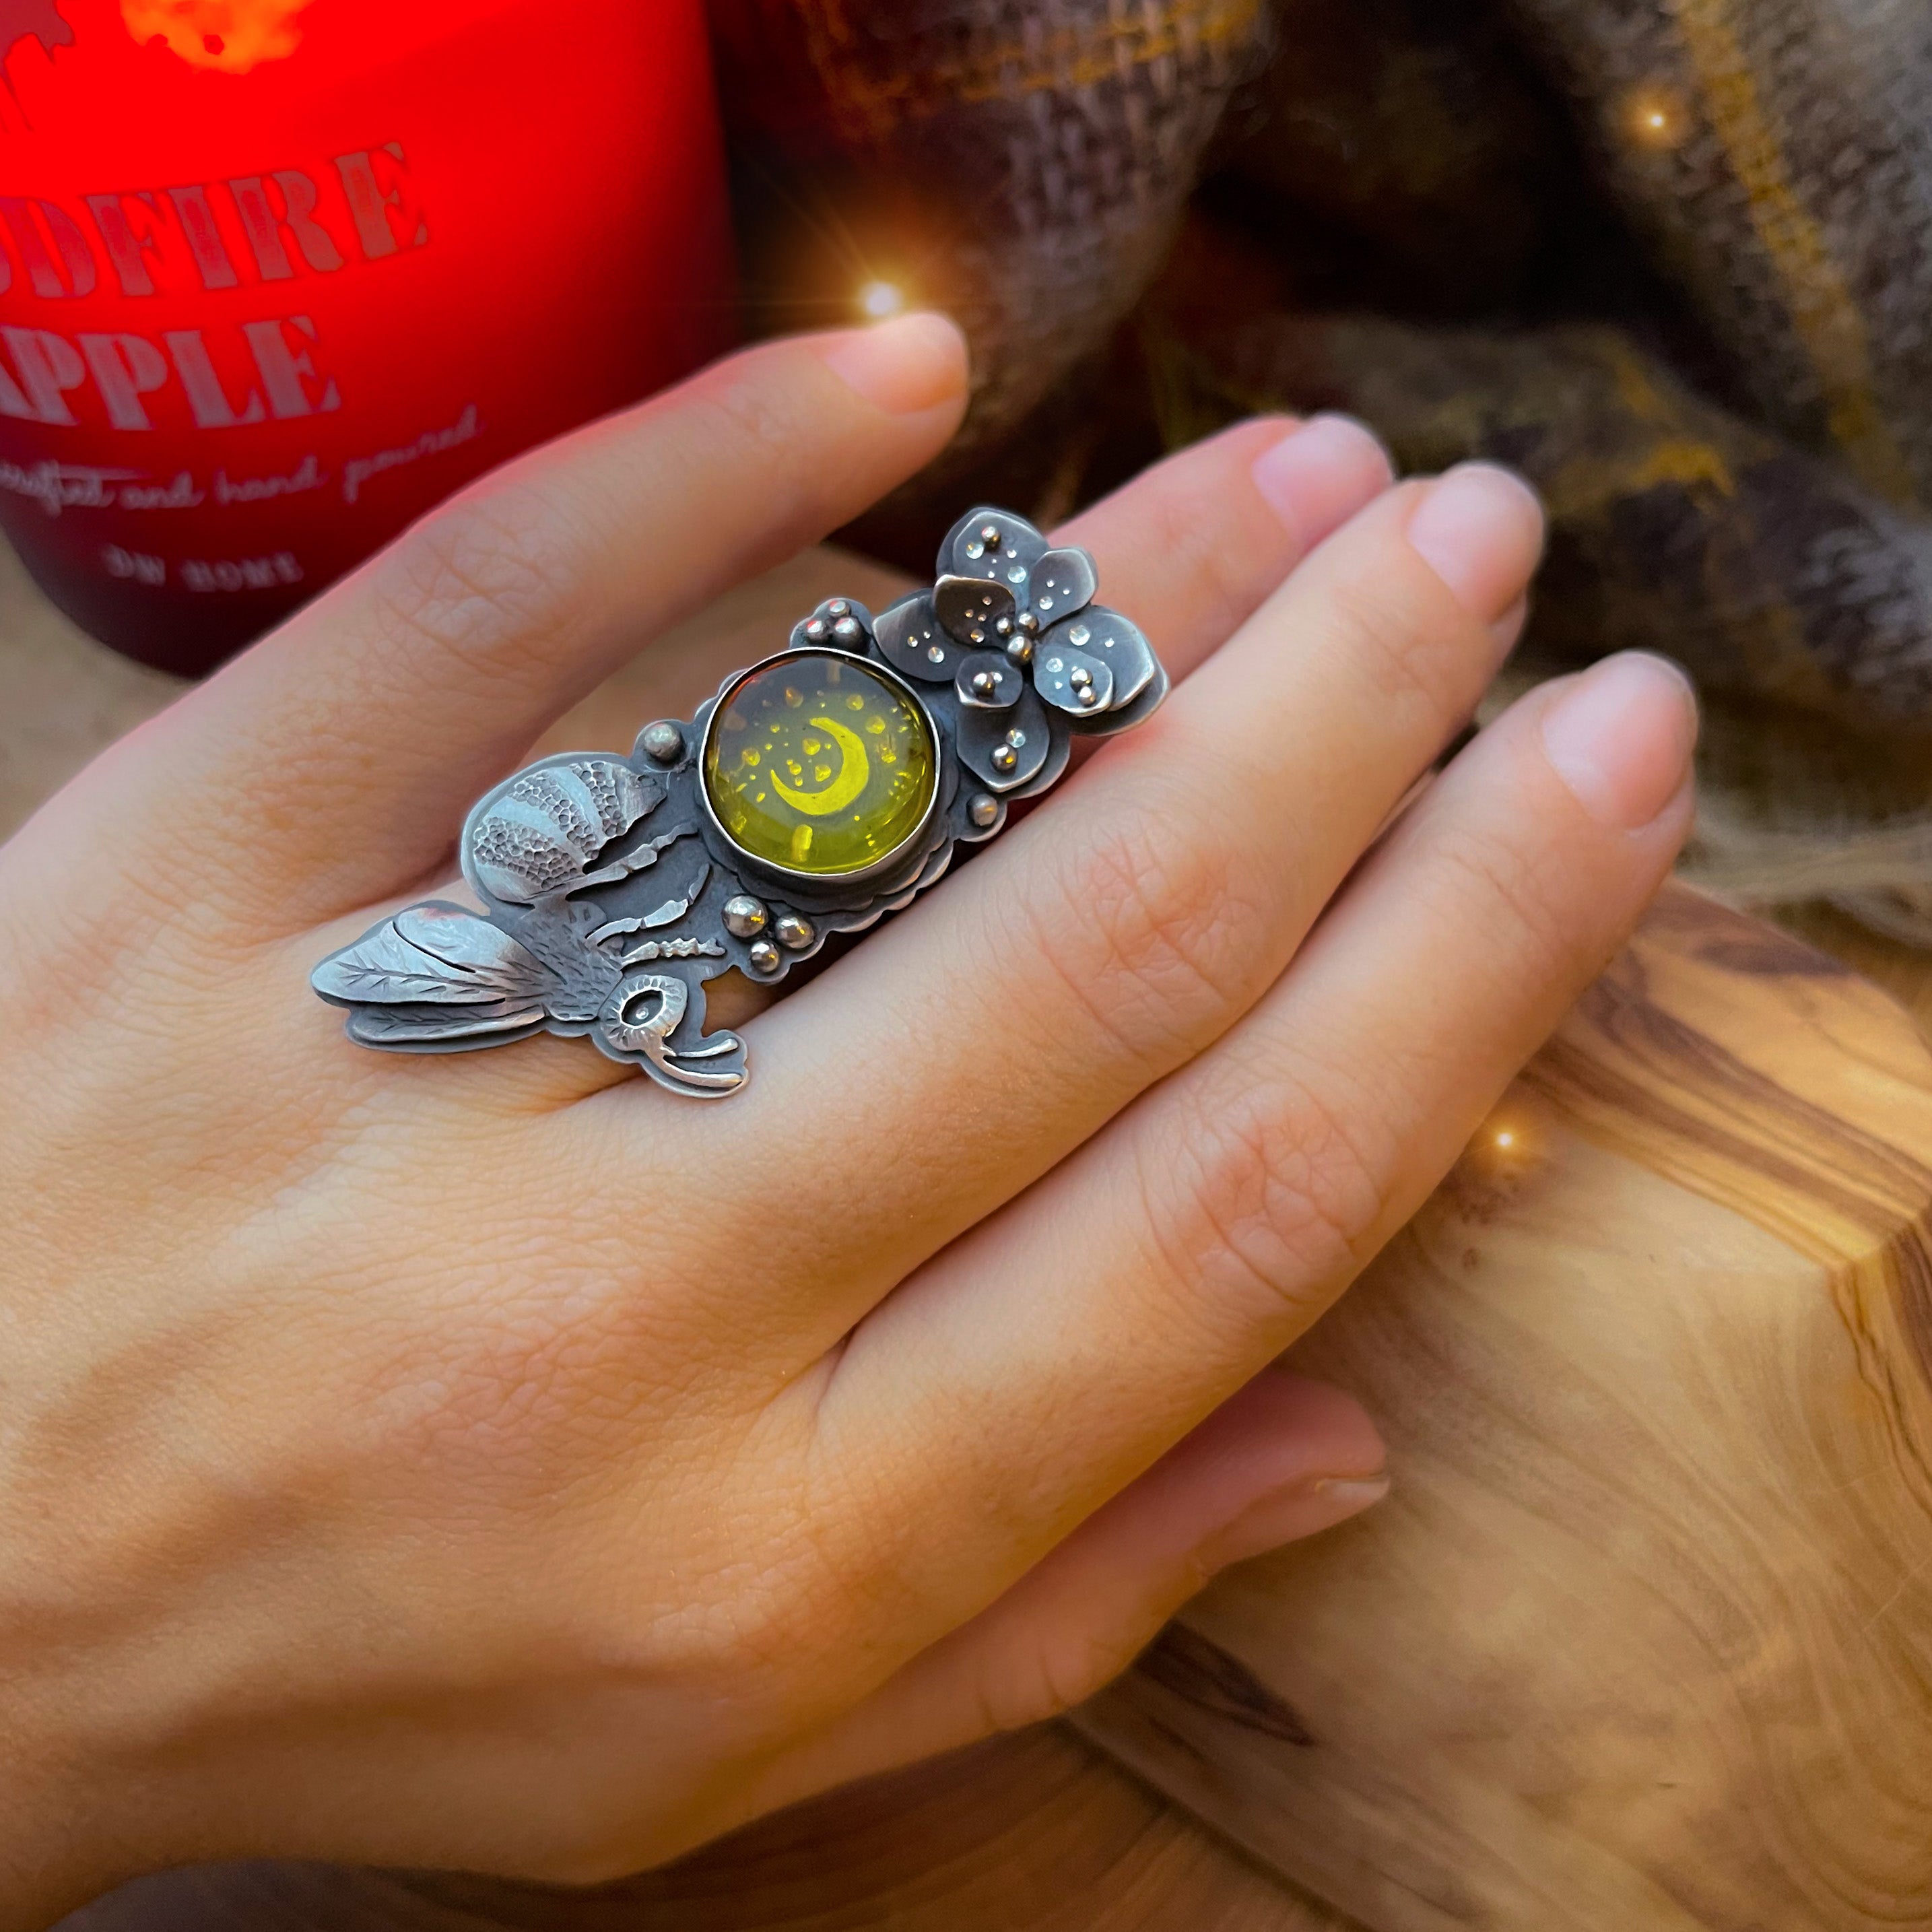 The Night Bee Ring with Baltic Amber 7.5 US